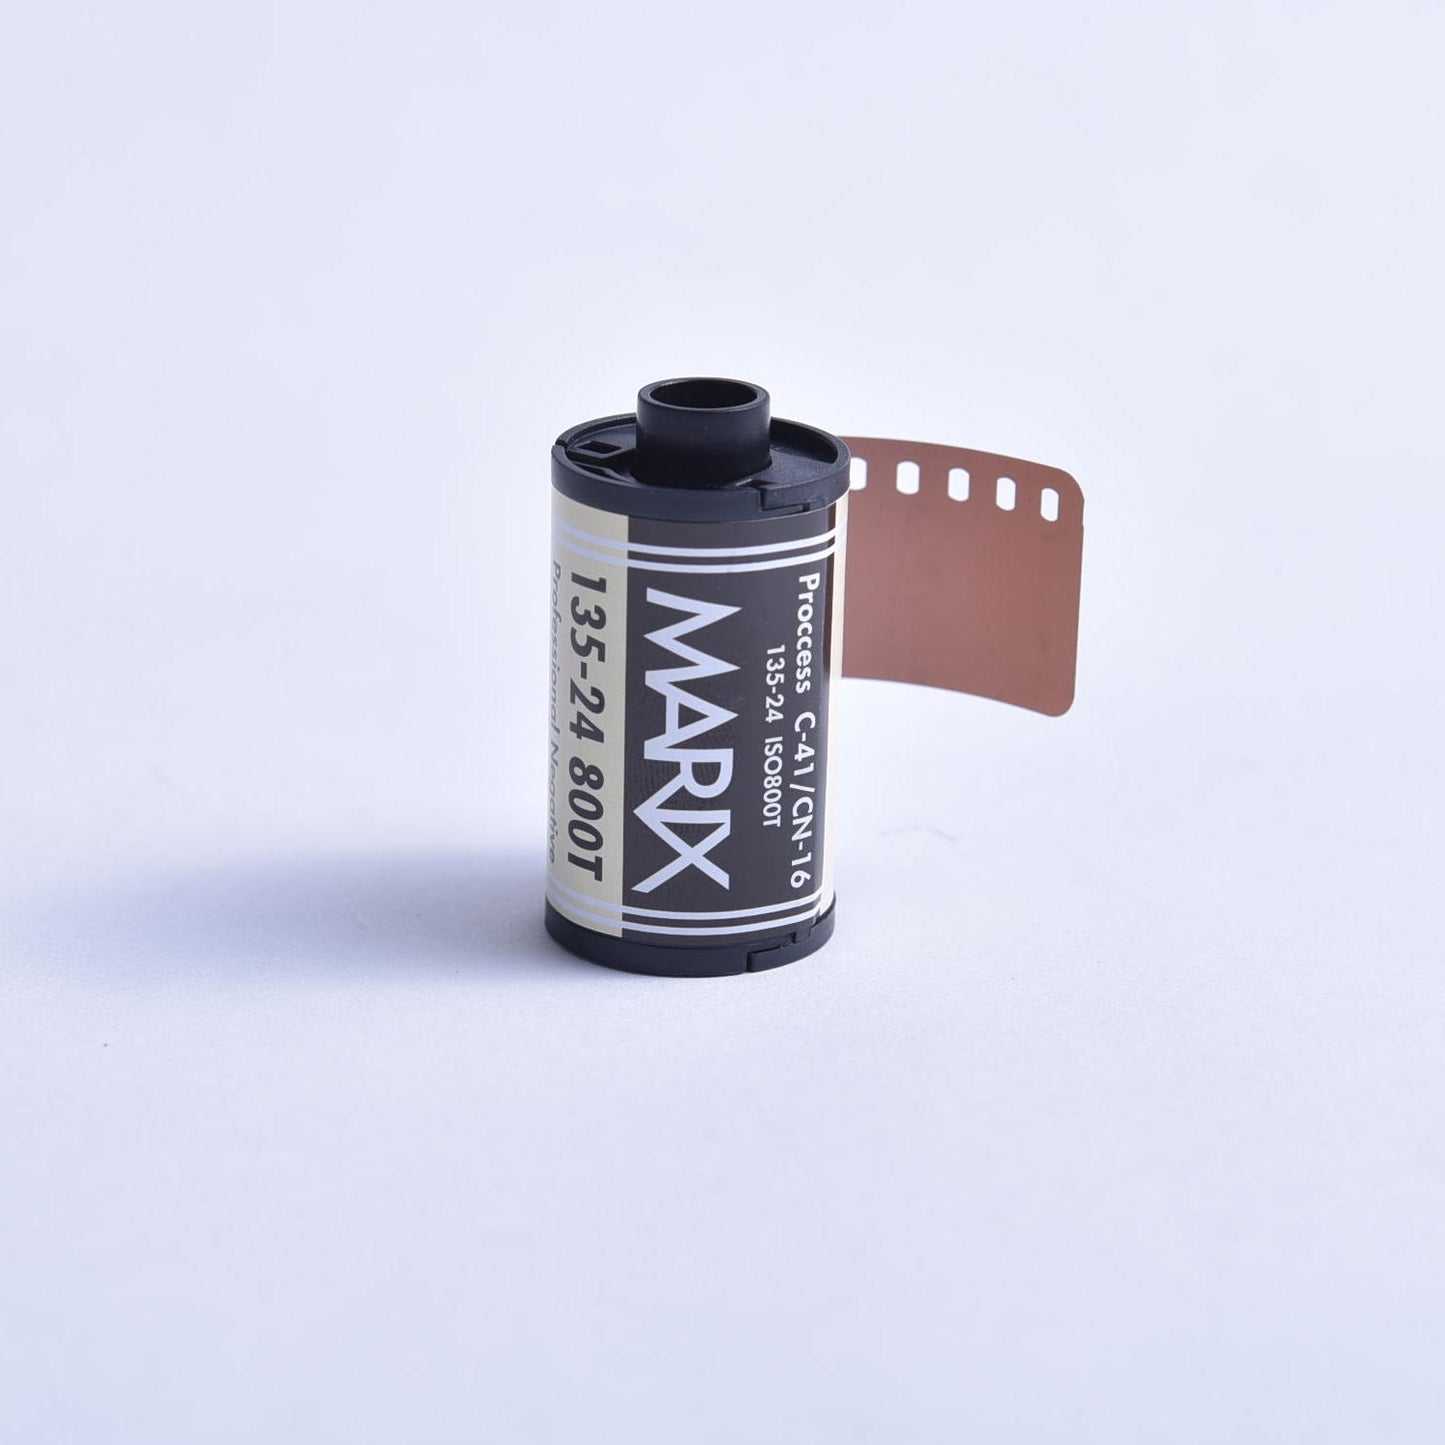 [New release] MARIX Color movie NegaFilm 800T 24 sheets